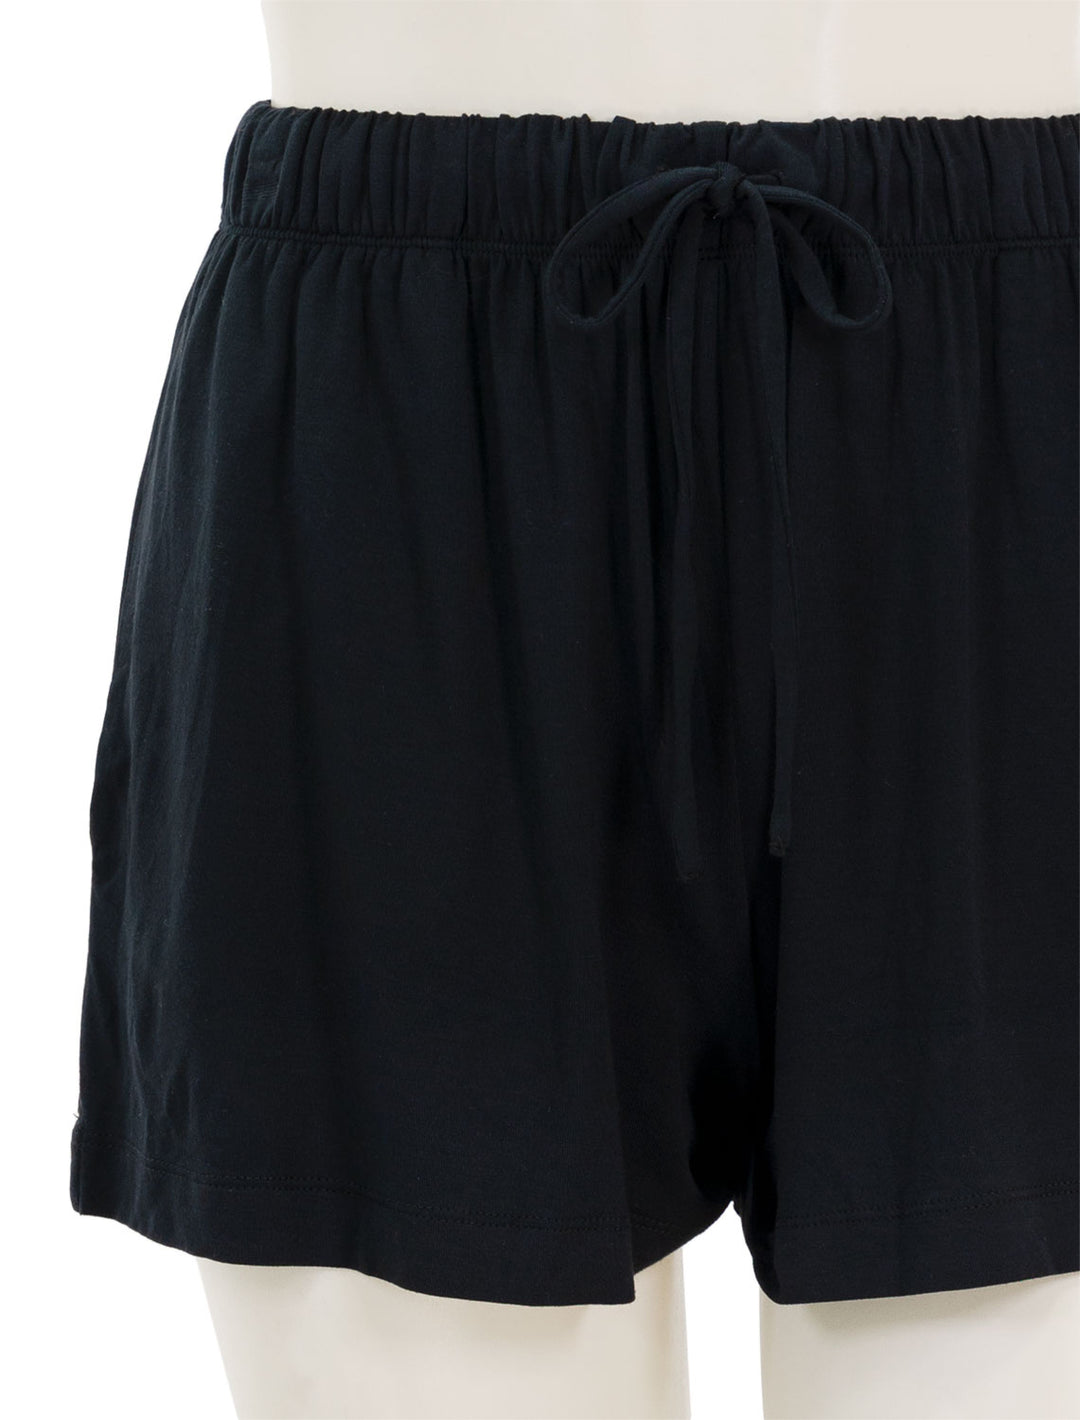 Close-up view of eberjey's gisele everyday relaxed short in black.